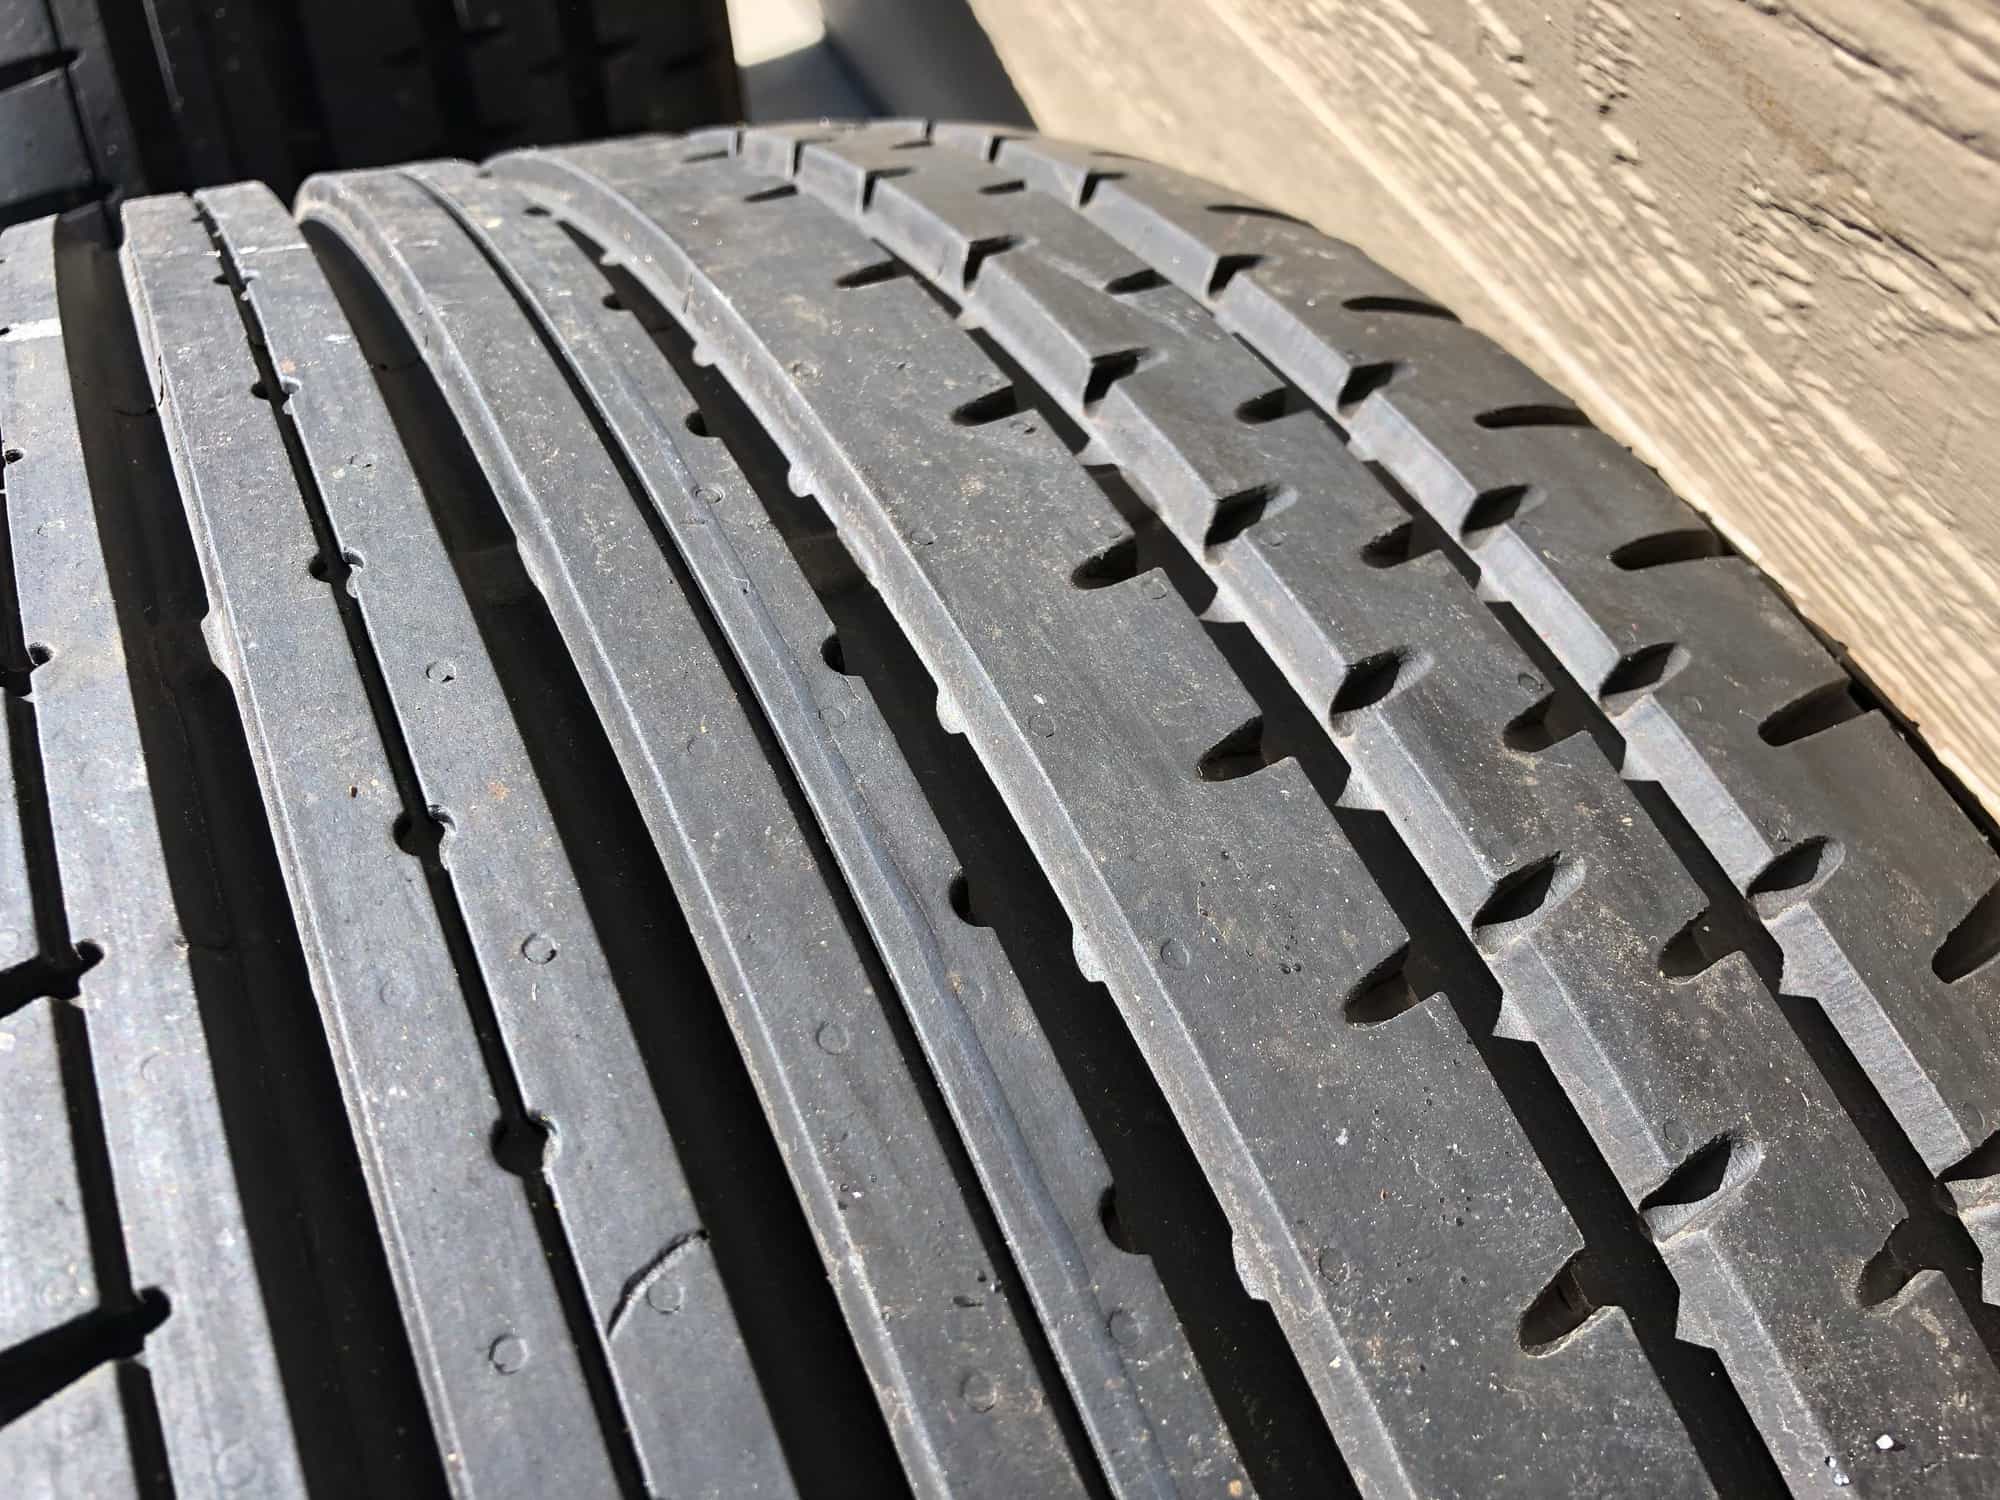 Wheels and Tires/Axles - FS [MidWest] New Continental Max Perf. Summer tires in 245/45ZR18 & 270/40ZR18 - New - All Years Any Make All Models - All Years Jaguar F-Type - Racine, WI 53403, United States